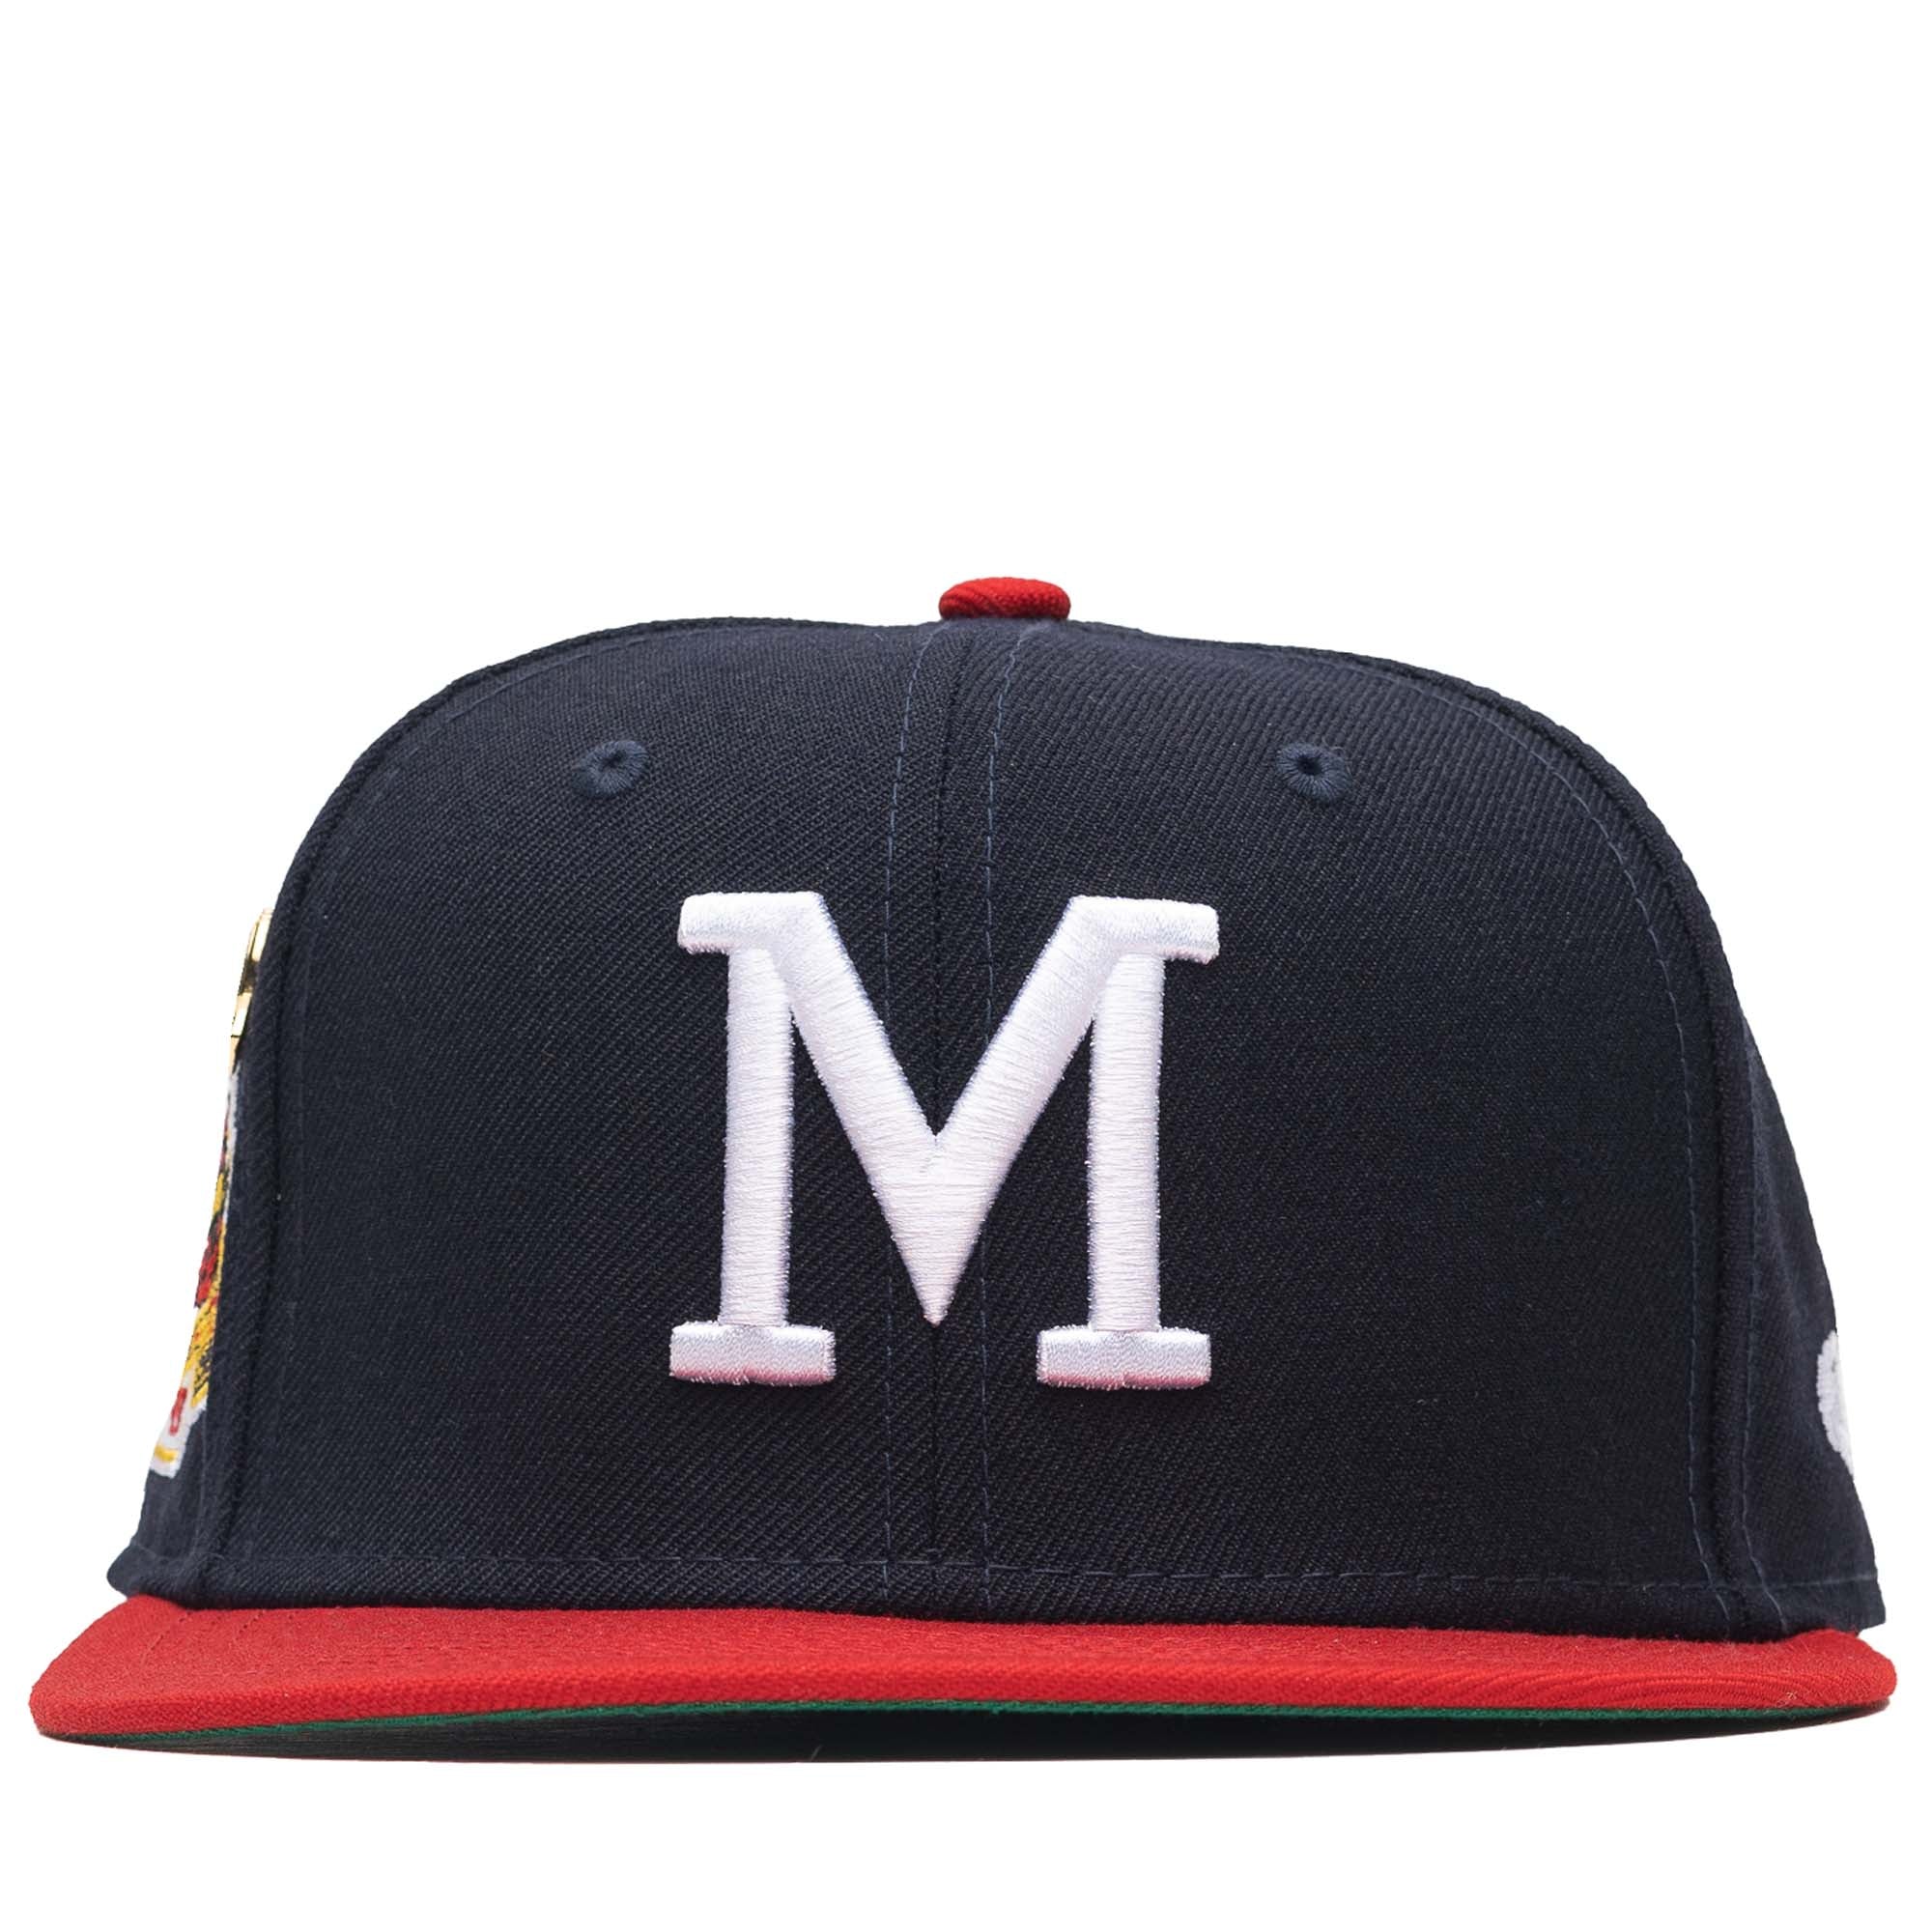 New Era Milwaukee Braves 59FIFTY Fitted Hat - Navy/Red, Size 7 1/8 by Sneaker Politics